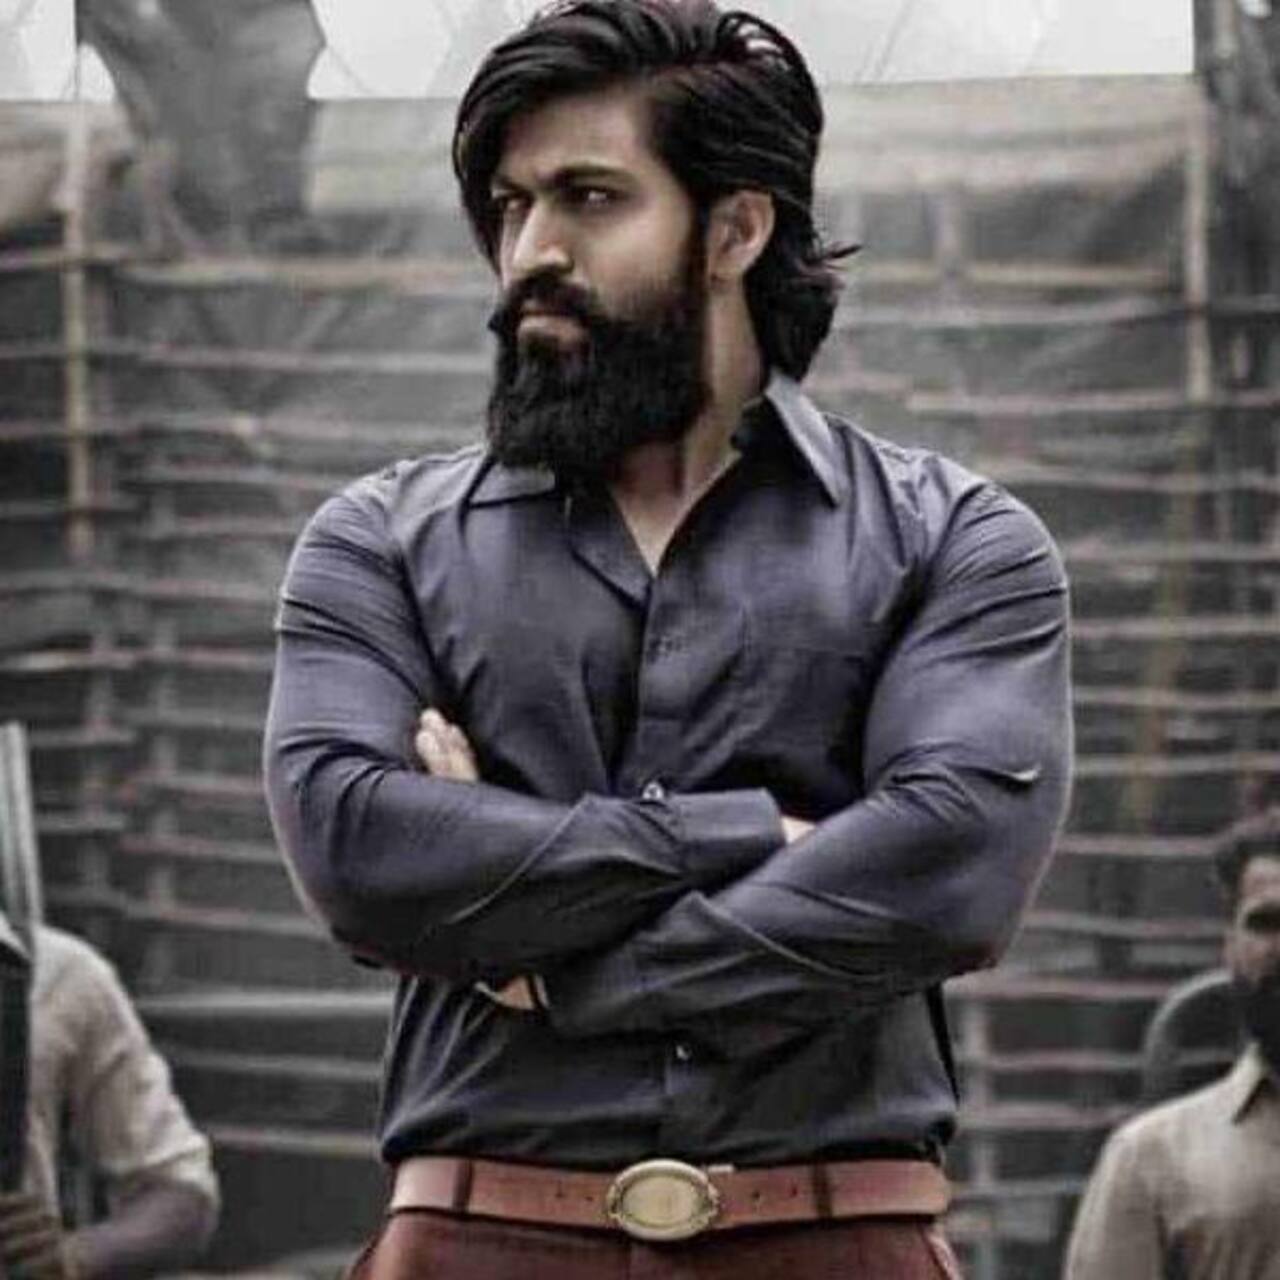 KGF 2 box office collection day 11: Yash starrer beats all Mohanlal, Mammootty, Dulquer Salmaan films; SMASHES new RECORD in Kerala